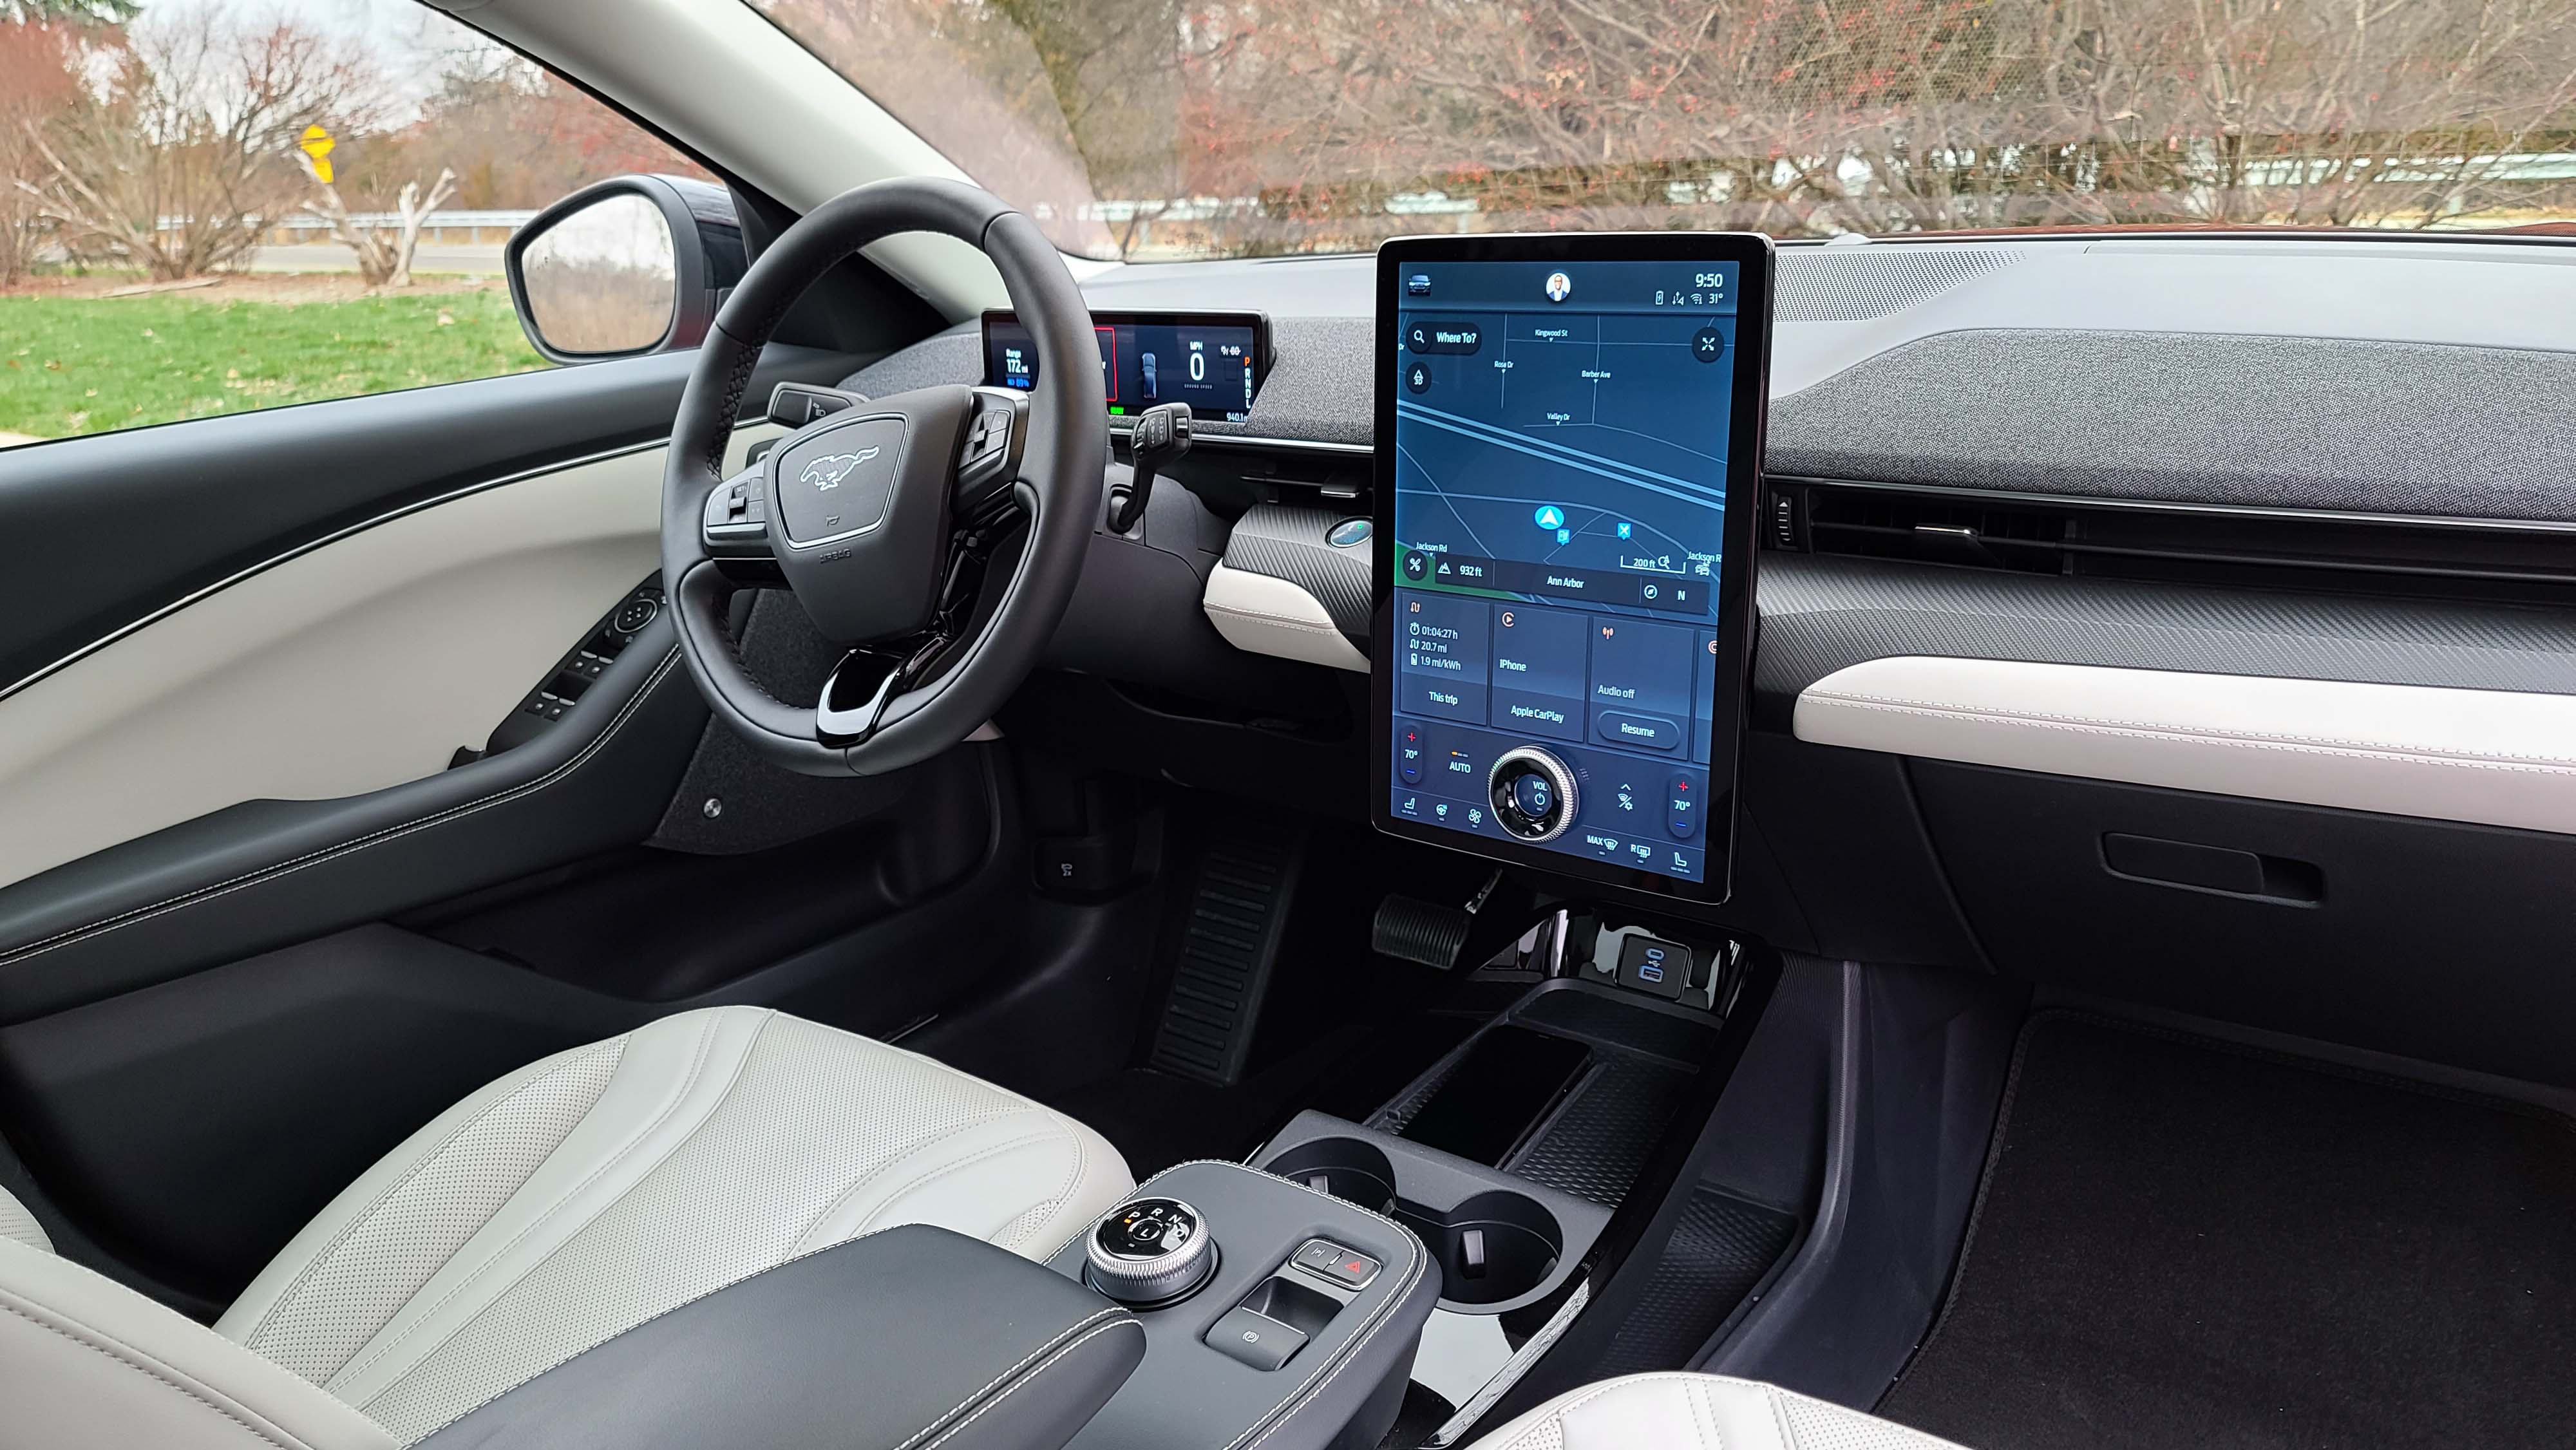 The 2021 Ford Mustang Mach-E interior is dominated by a 15.5-inch screen that offers navigation as well as "pages" for different features like trip info, music, and Apple CarPlay connectivity. Familiar Ford features include a rotary shifter.